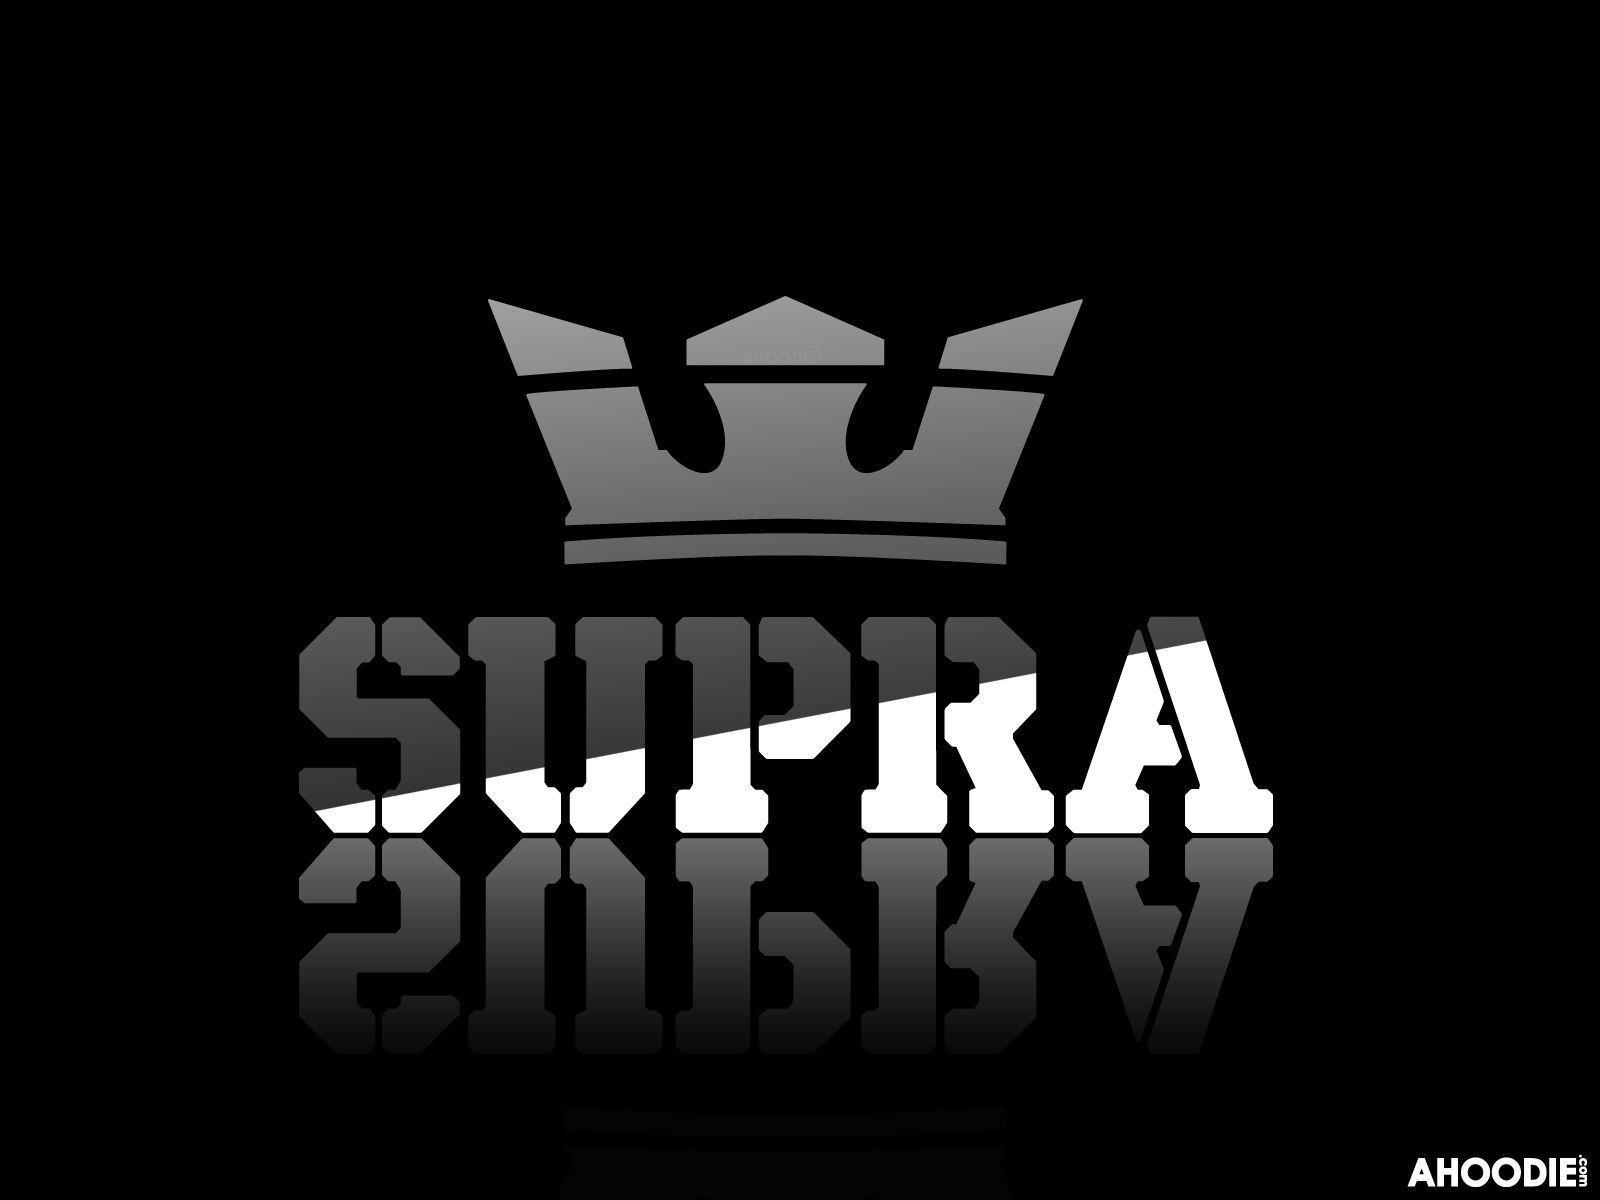 Supra Shoes Logo - Pin by Vanessa on ♥♥Words/Quotes Wallpapers!♥♥ | Supra shoes ...